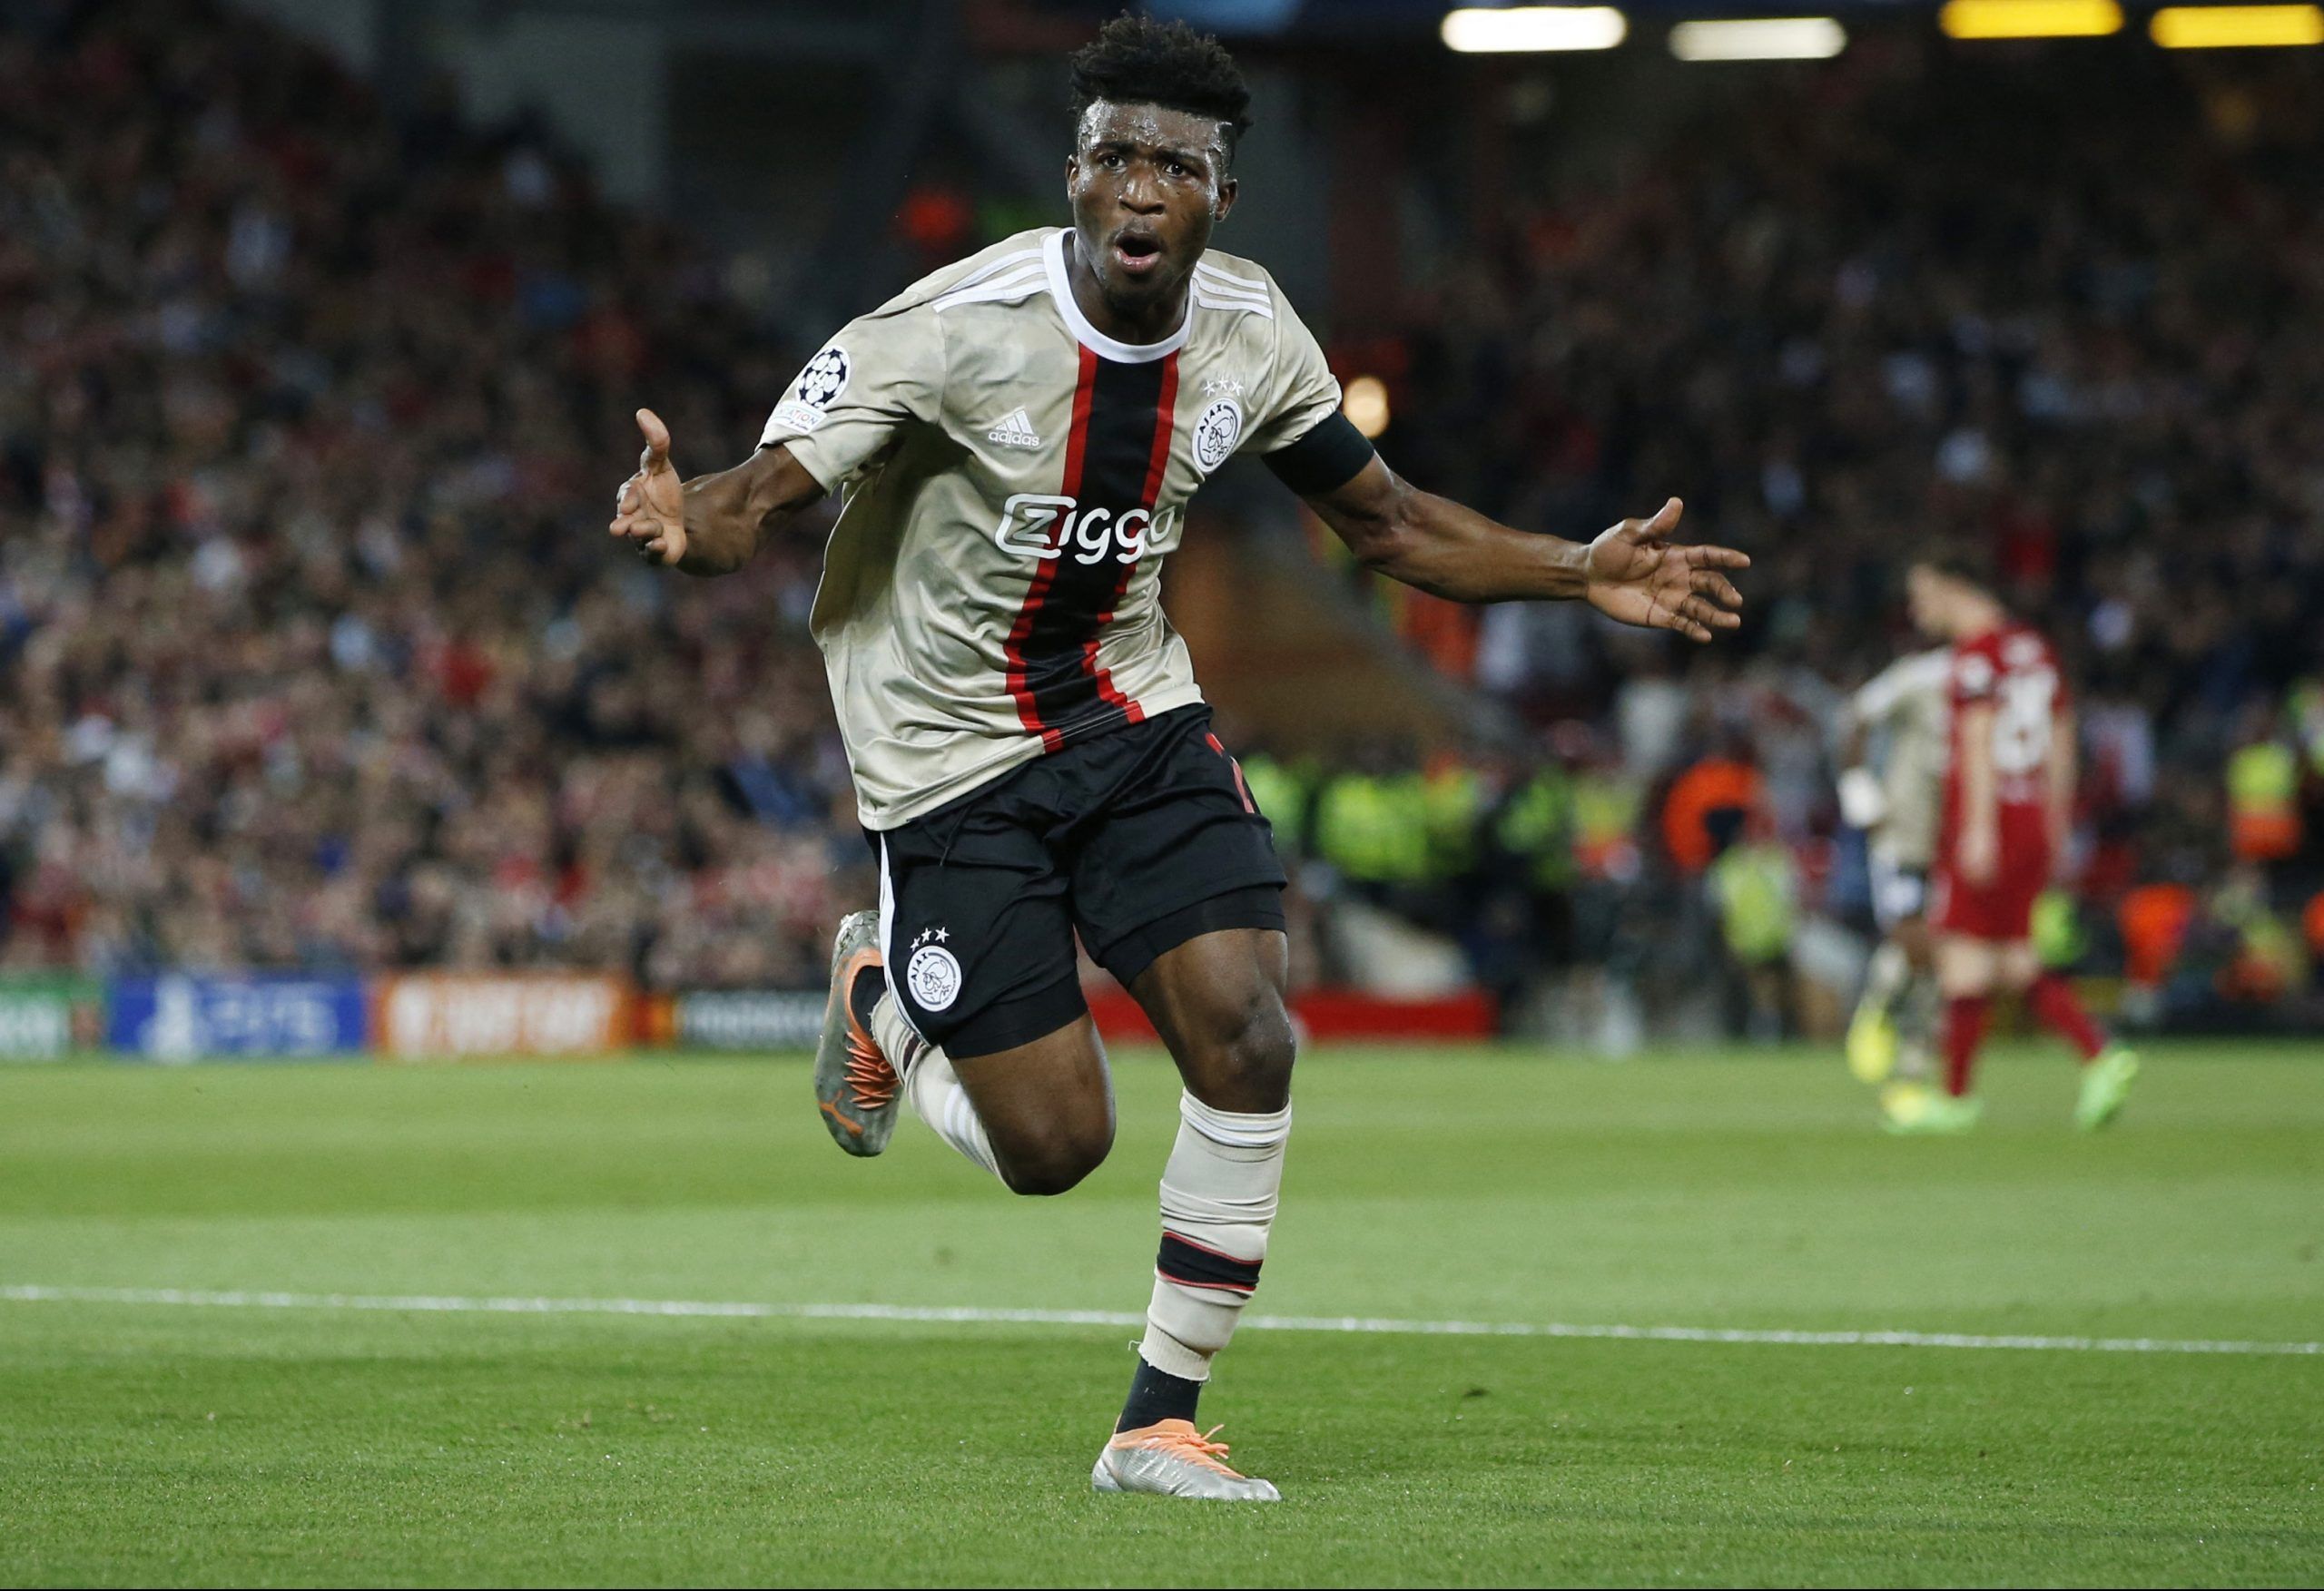 Soccer Football - Champions League - Group A - Liverpool v Ajax Amsterdam - Anfield, Liverpool, Britain - September 13, 2022  Ajax Amsterdam's Mohammed Kudus celebrates scoring their first goal Action Images via Reuters/Ed Sykes